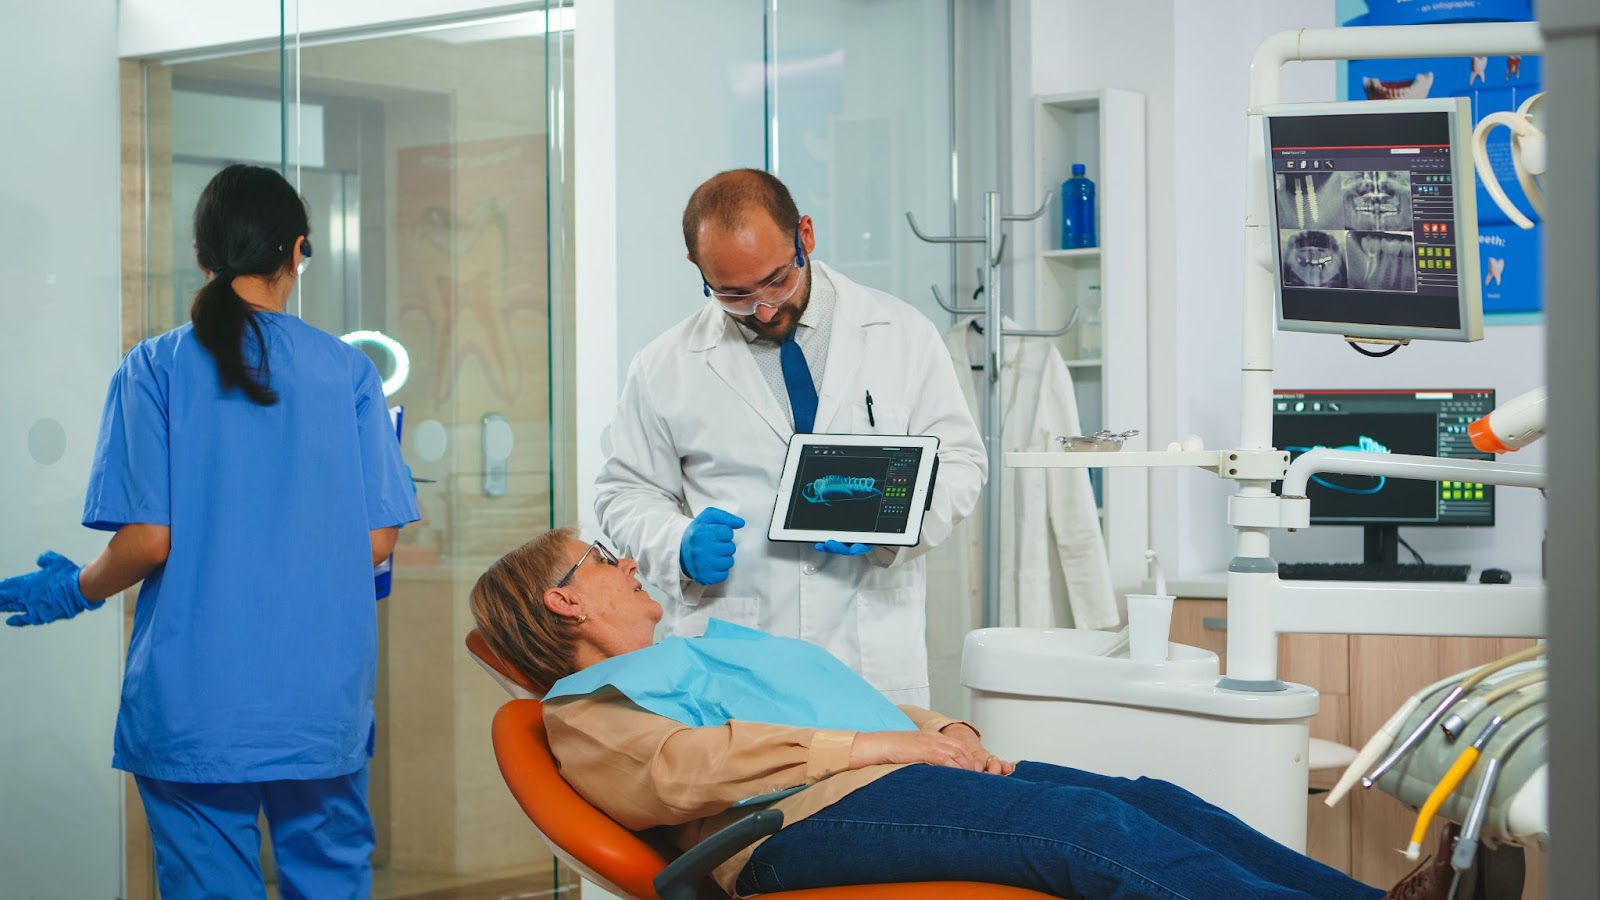  Dentistry doctor showing an x-ray of teeth to the patient using a tablet in a dental clinic.